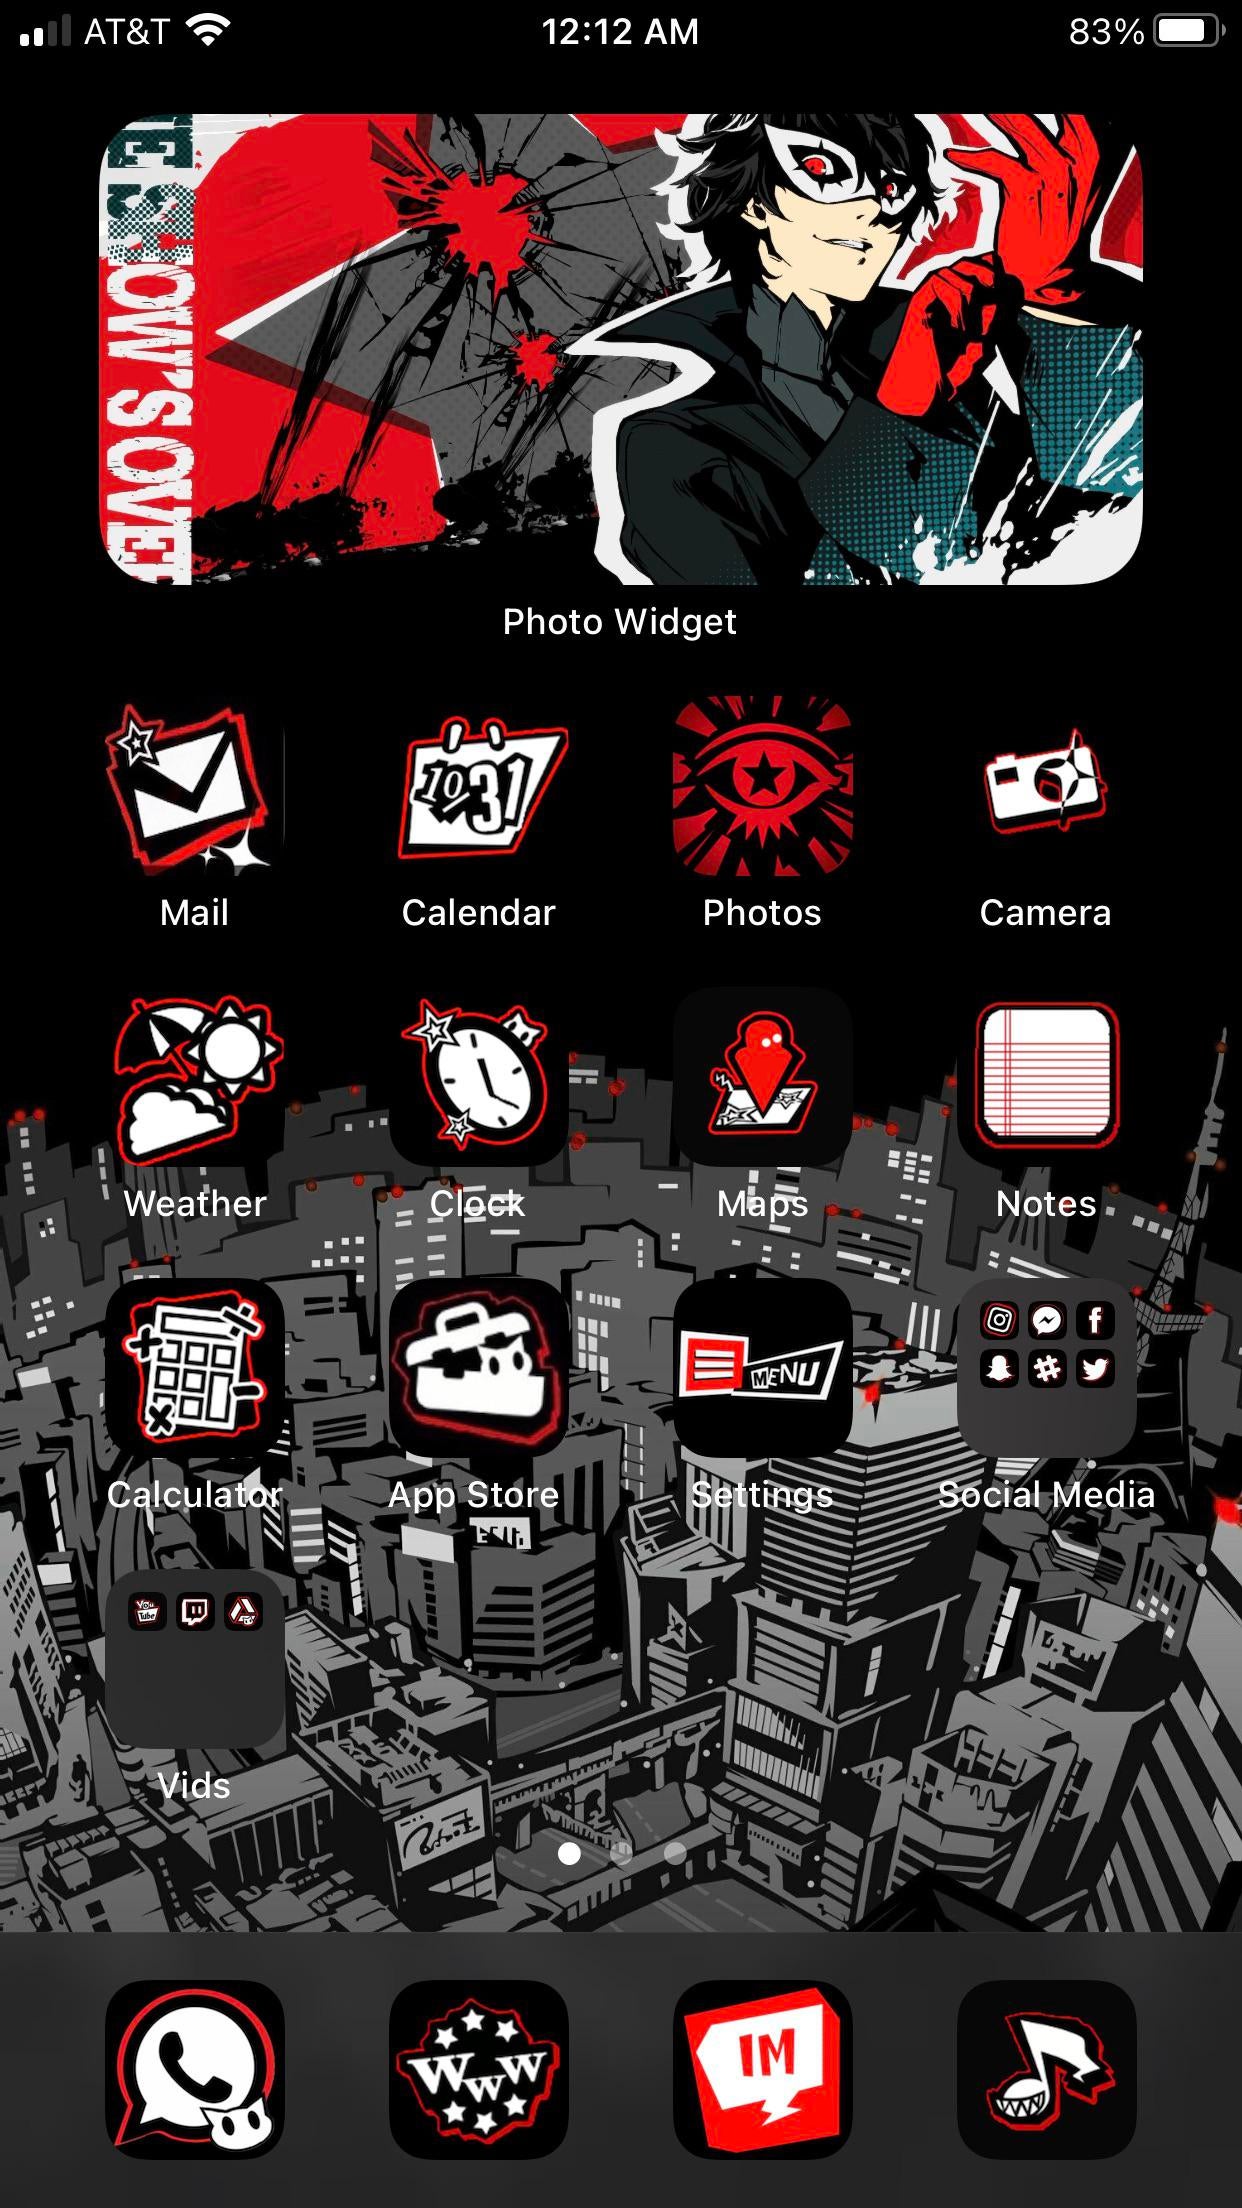 persona 5 iphone Wallpapers